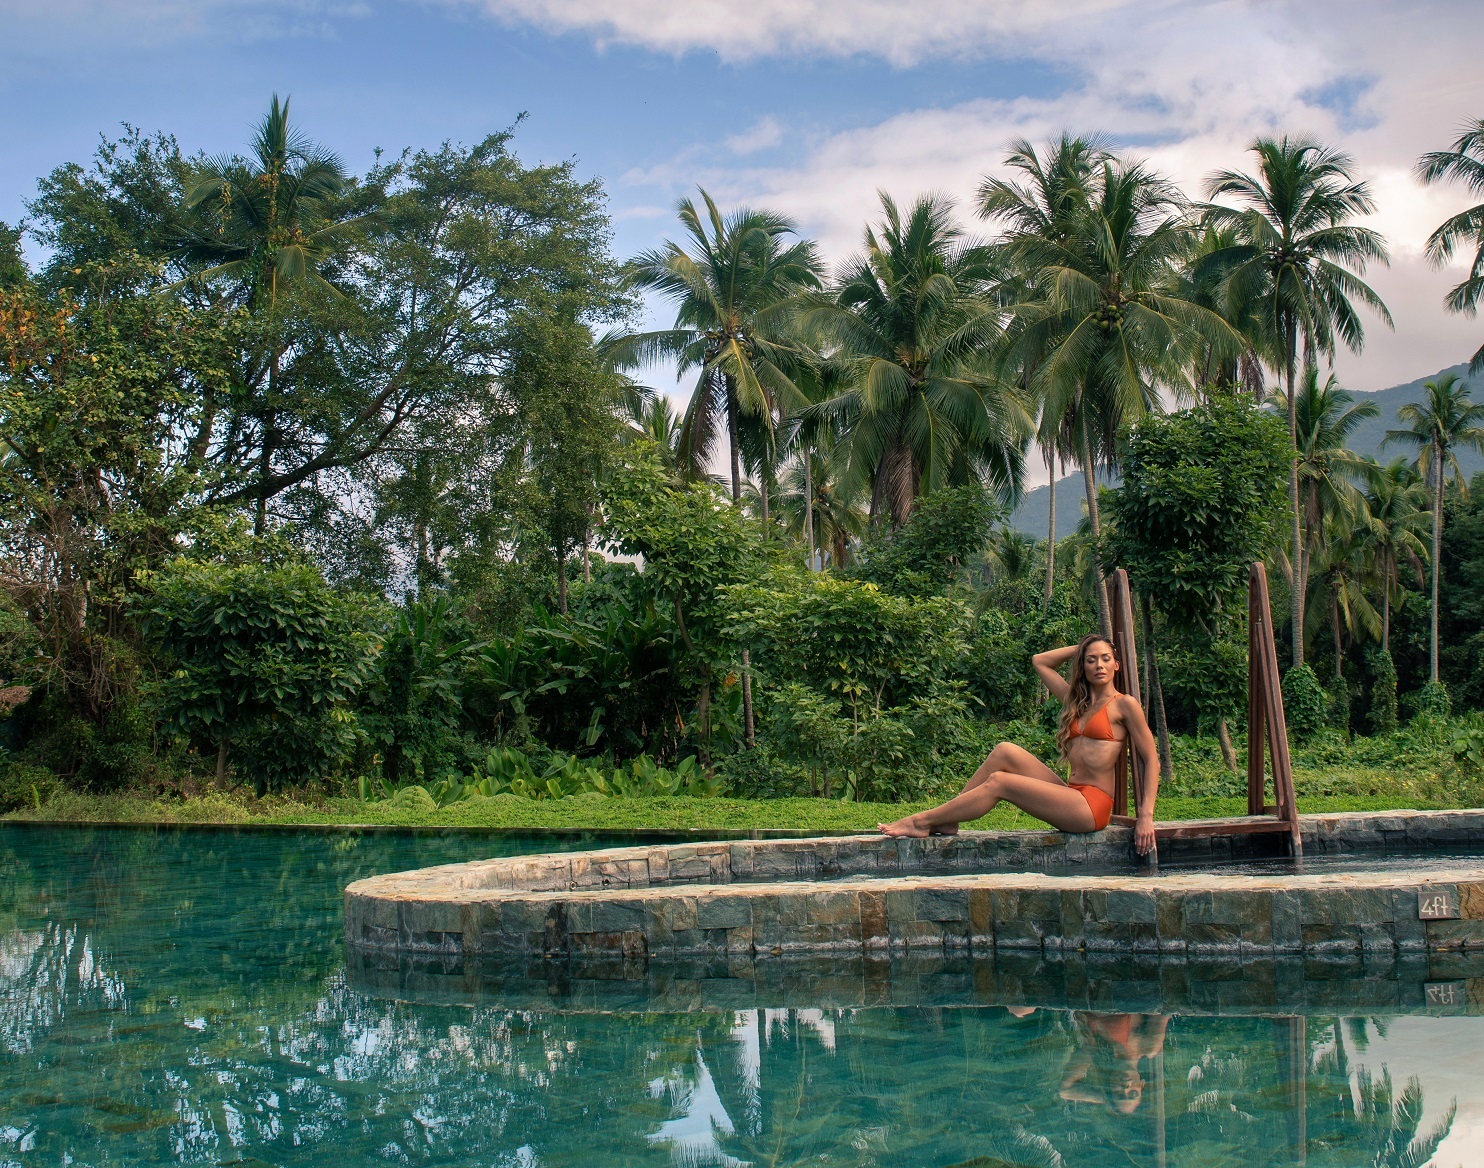 Wellness holidays at The Farm, San Benito in the Philippines